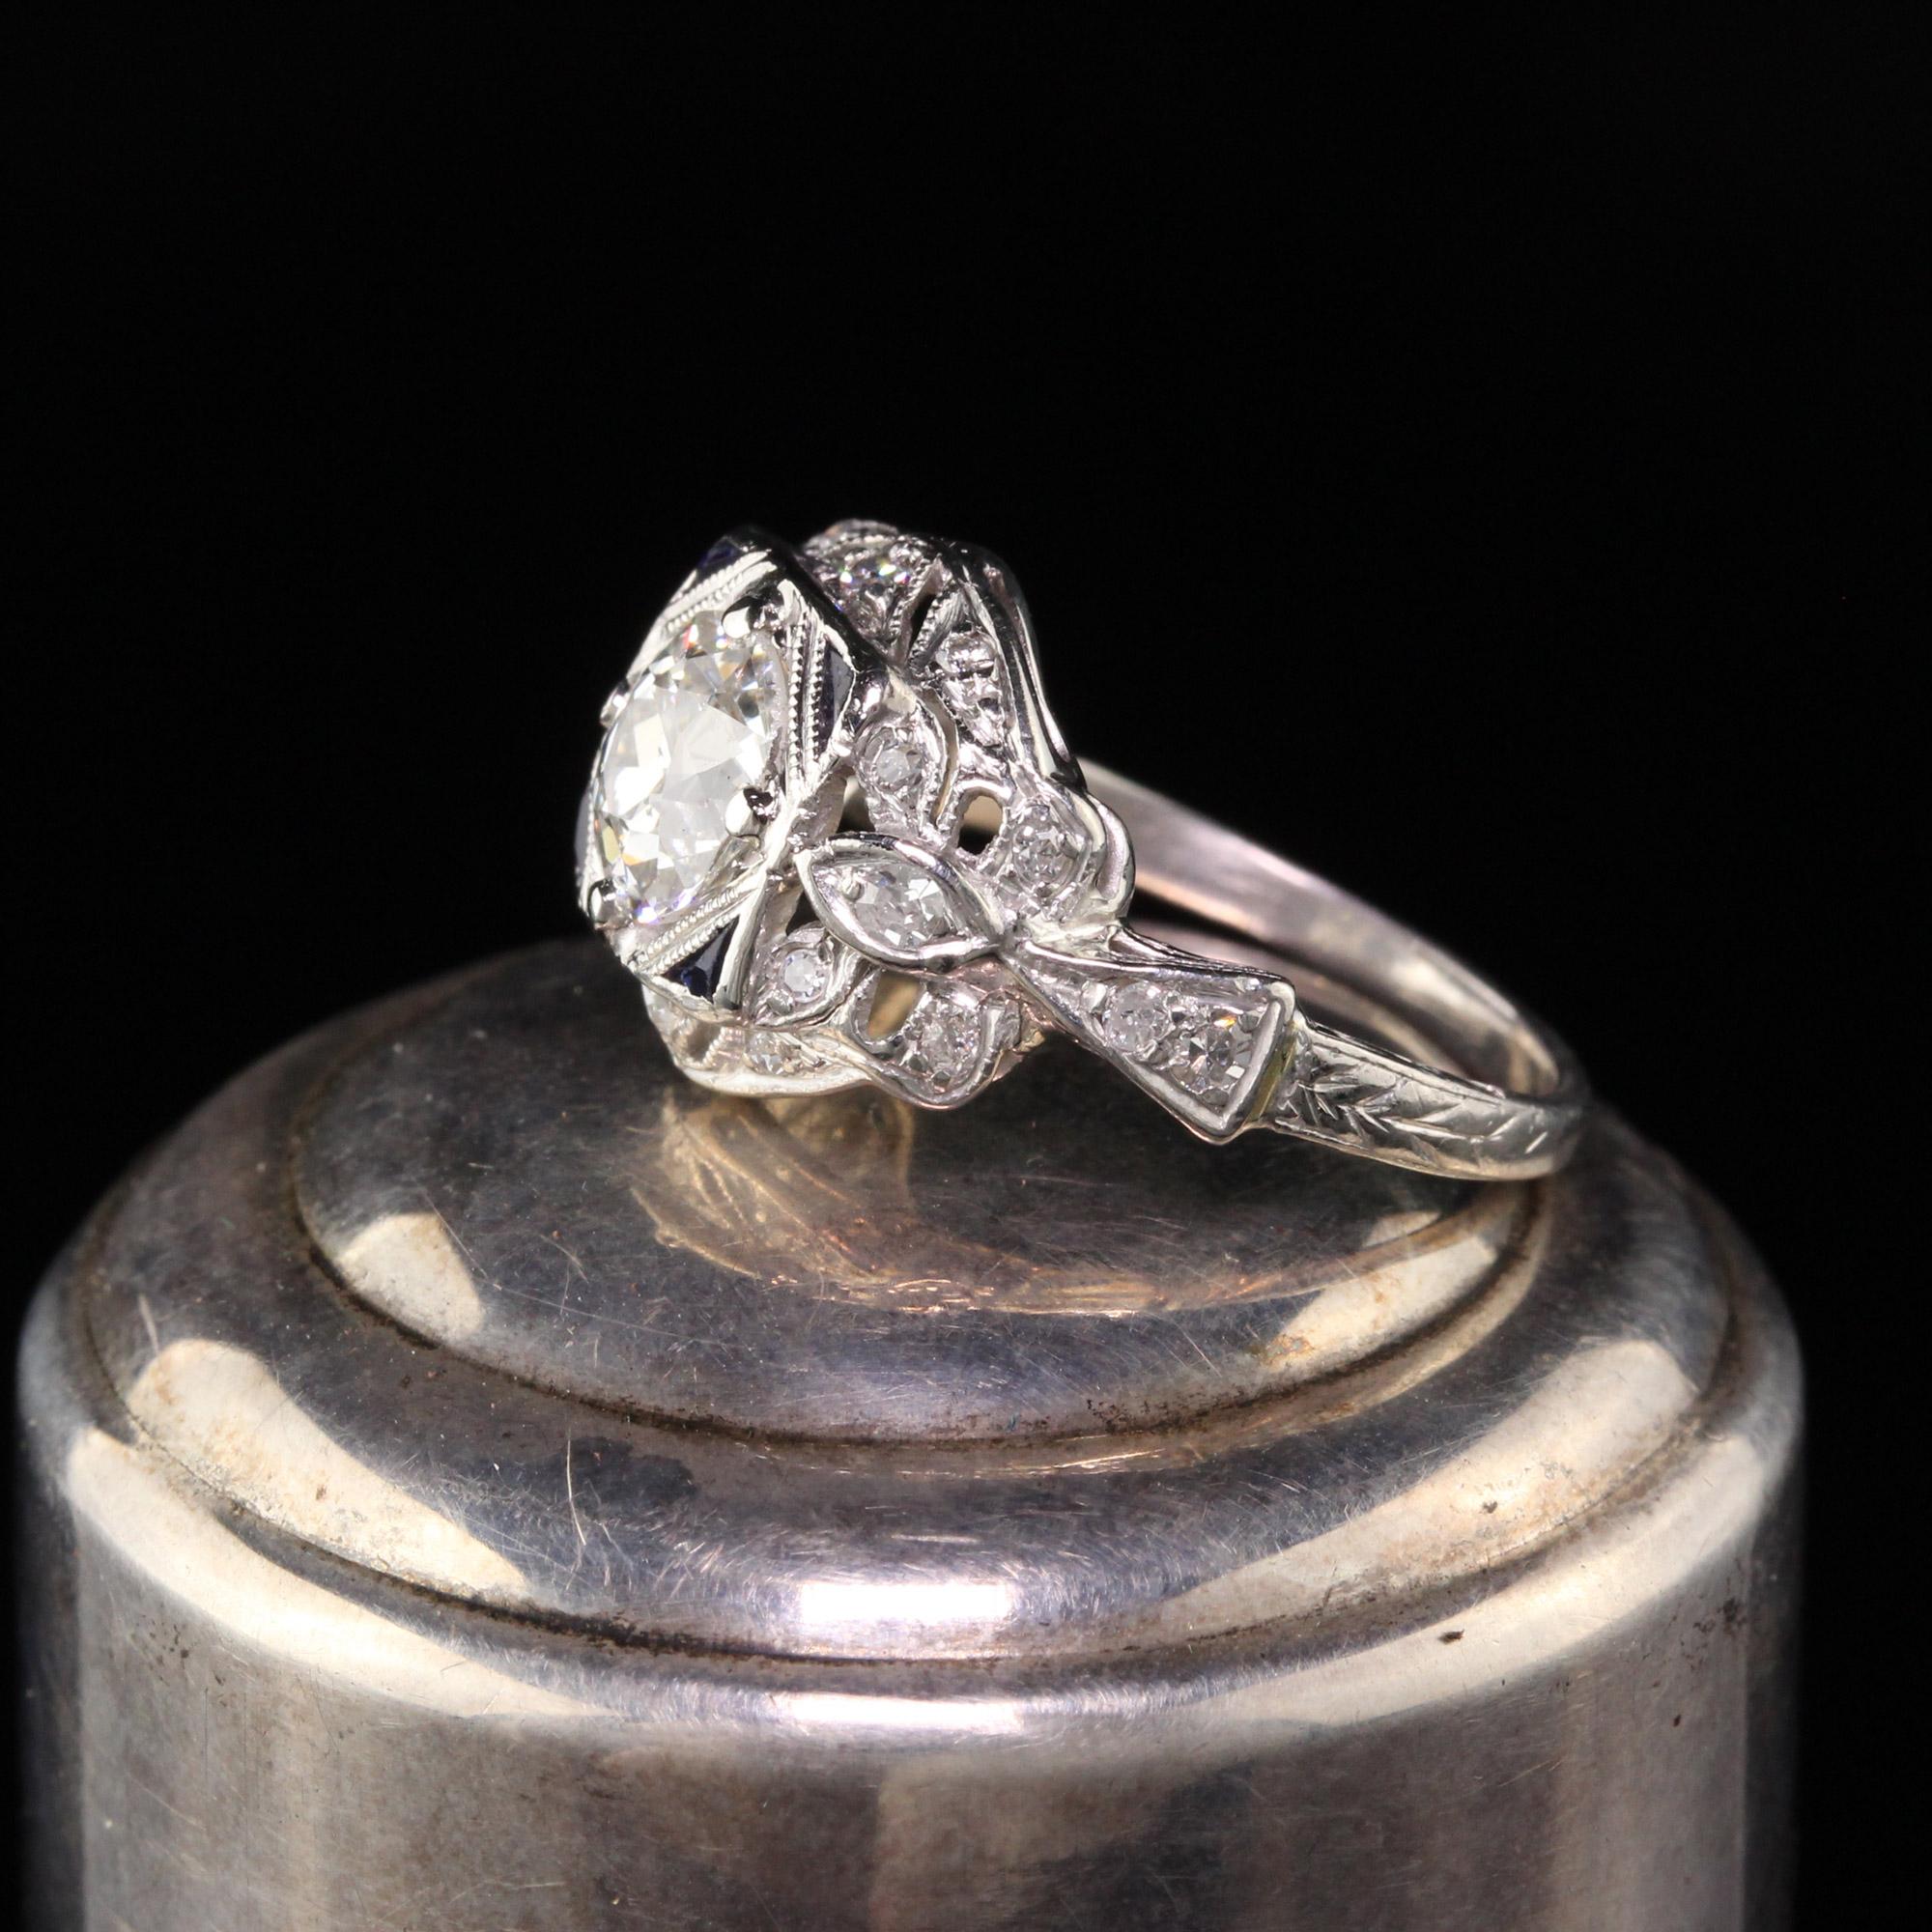 Gorgeous Antique Art Deco Platinum Old European Diamond Engagement Ring. This gorgeous engagement ring is in wonderful condition with a 1.06 ct old european cut diamond with sapphire accents. It is a bright showstopper! 

Item #R0686

Metal: